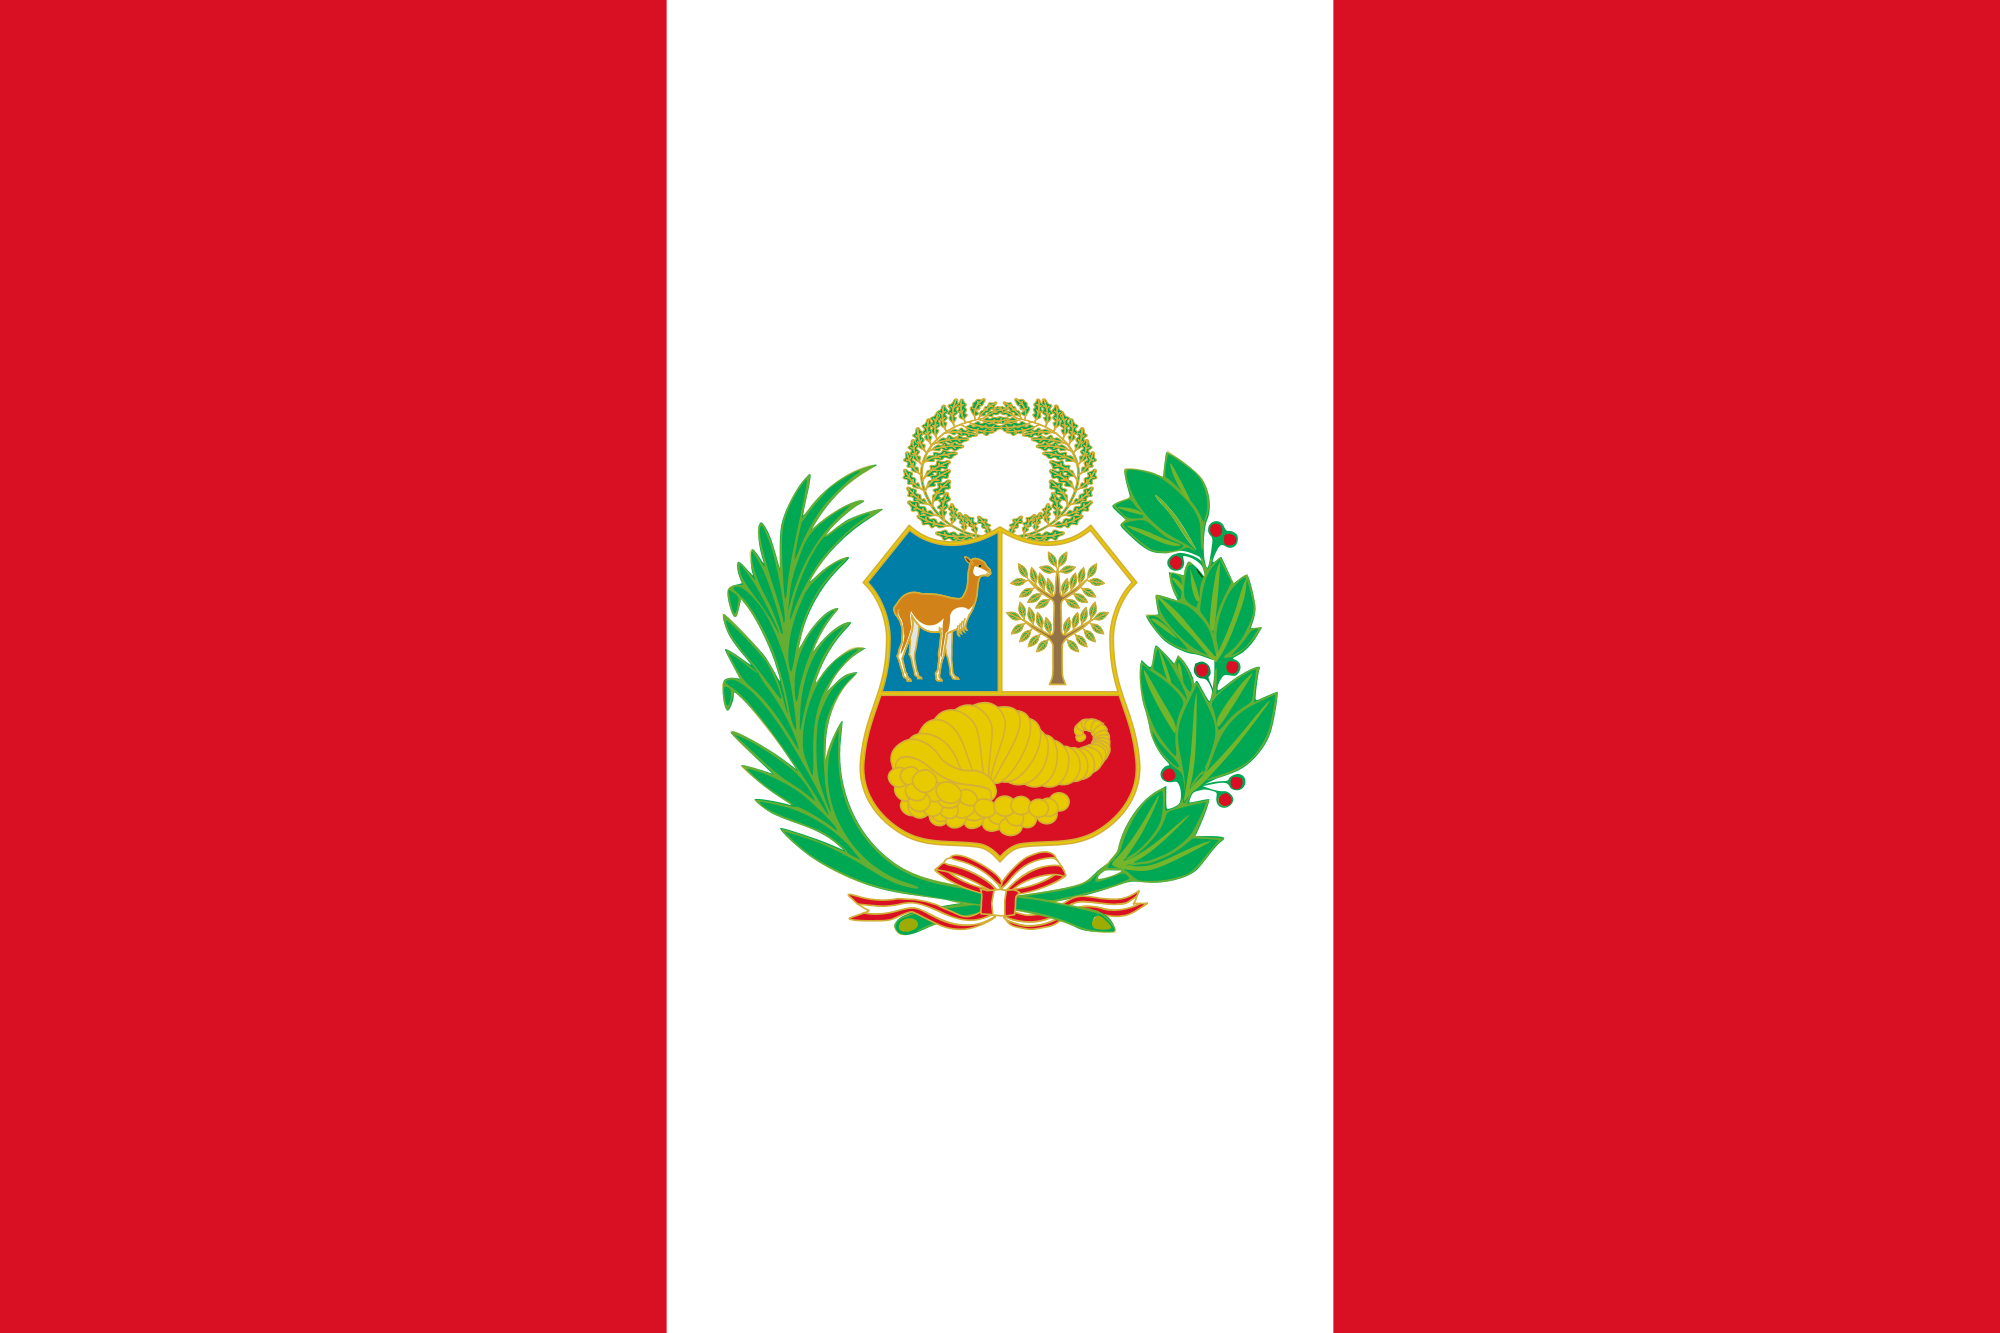 Red Square with White Lines Logo - Flag of Peru